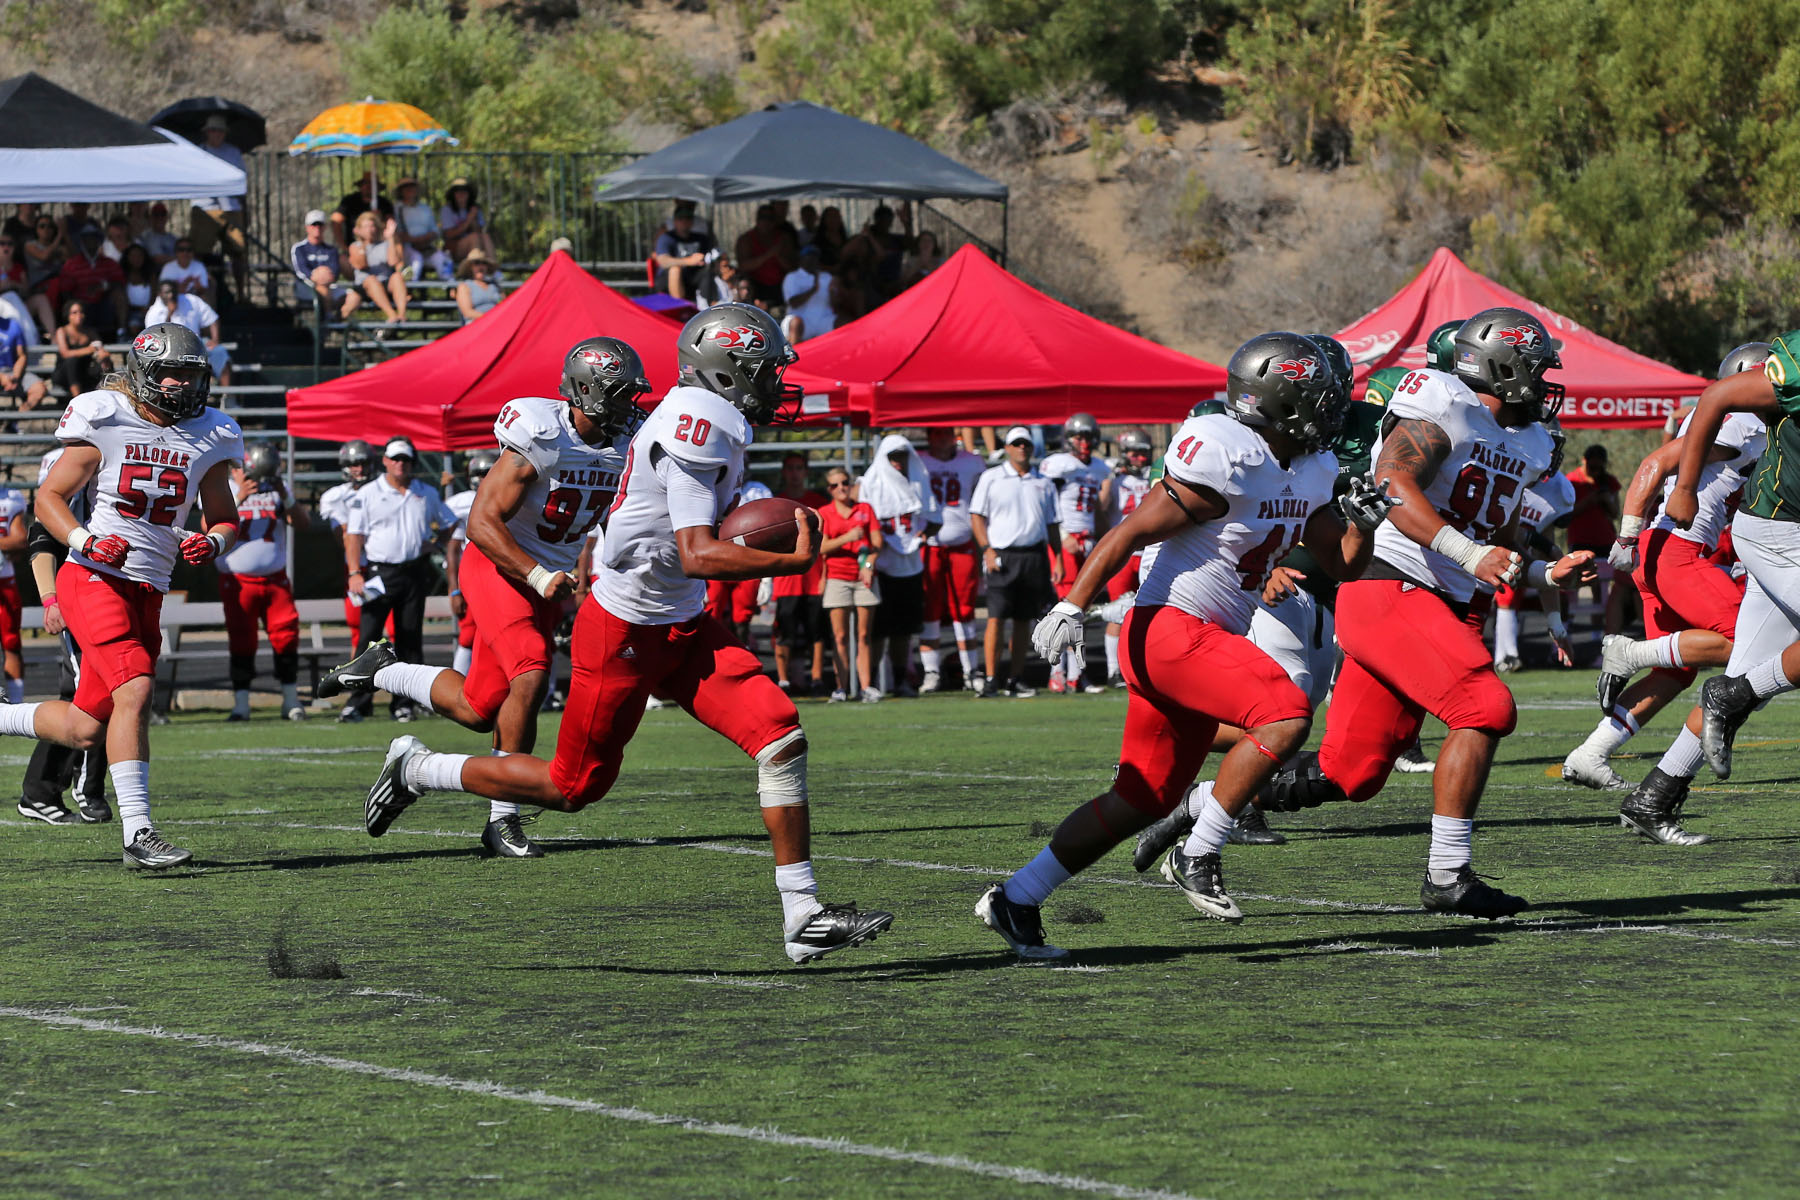 Bryce Alexander (20) returns an interception in the 3rd quarter of Palomar's 41-24 win against Grossmont College. (Photo courtesy of Hugh Cox.)